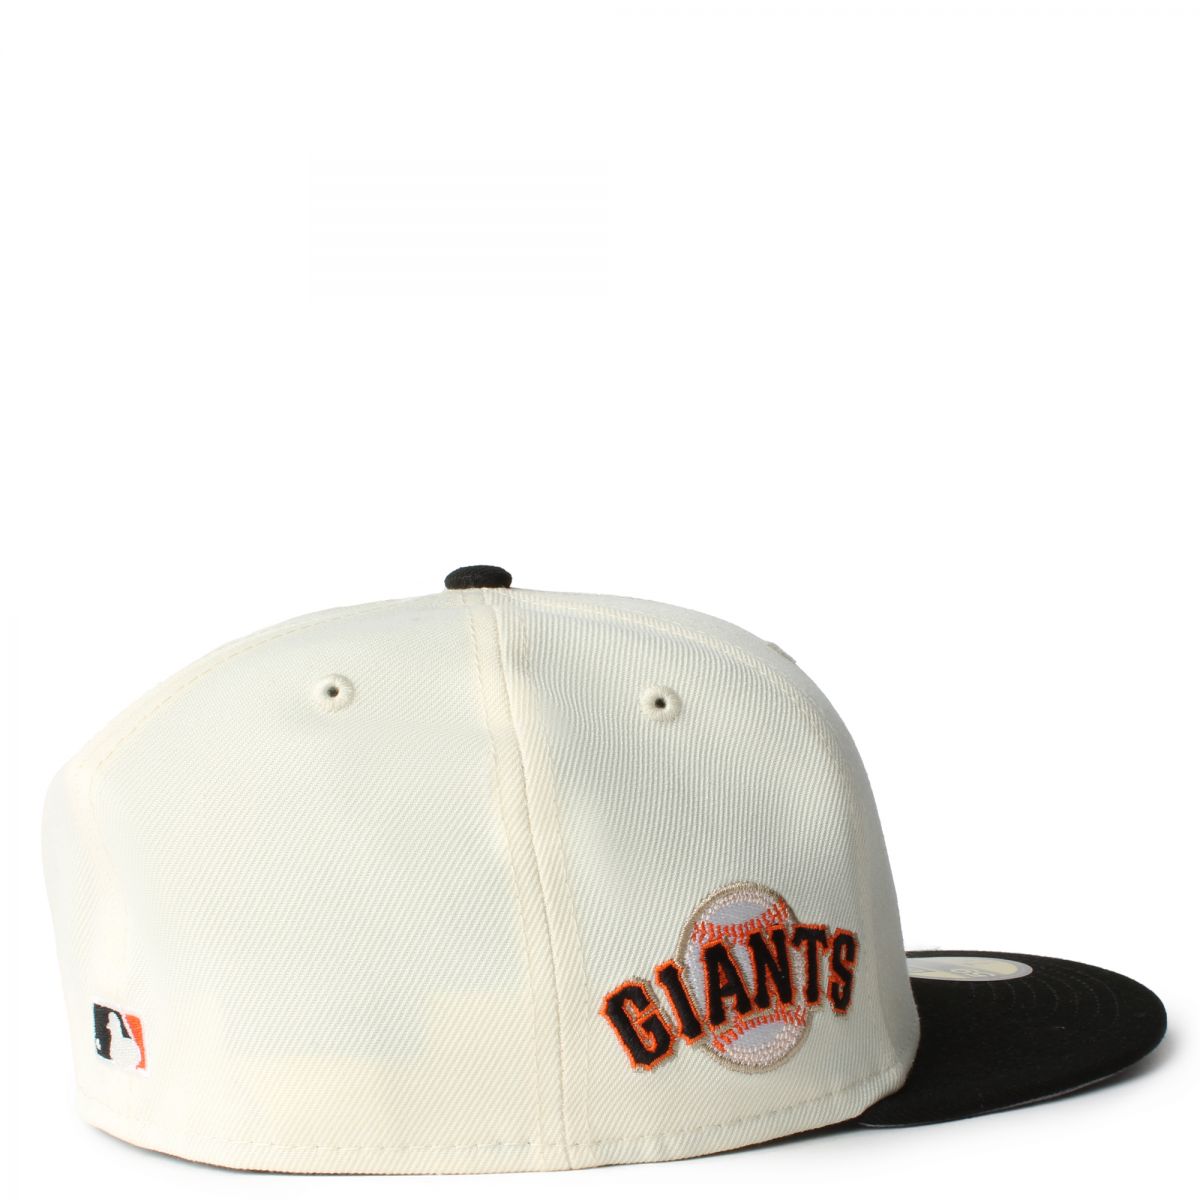 New Era Men's San Francisco Giants 59FIFTY Retro Fitted Hat - Black - 7 1/2 Each